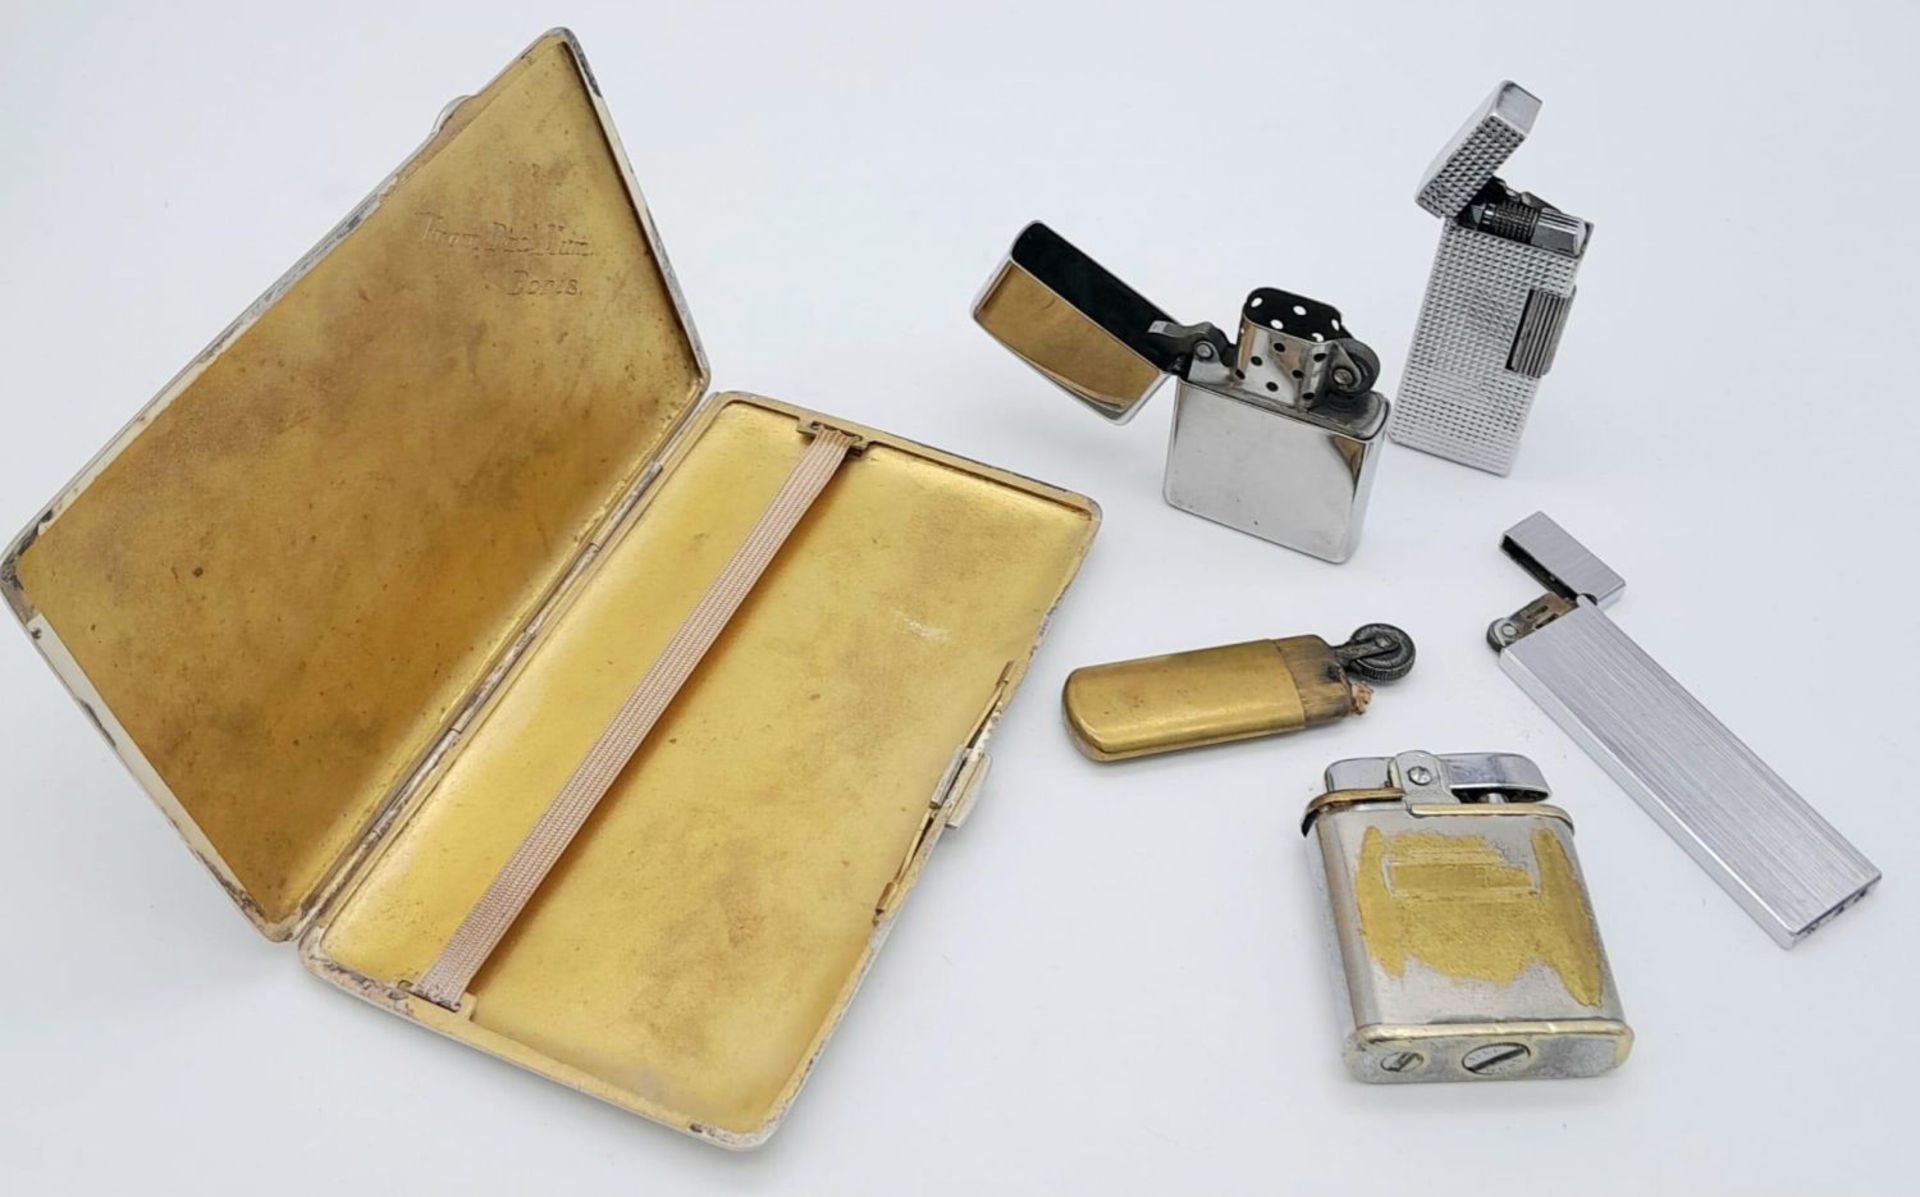 5 VINTAGE LIGHTERS TO INCLUDE A ZIPPO AND AN ARMY ISSUE PETROL LIGHTER PLUS A 1940'S CIGARETTE - Image 2 of 5